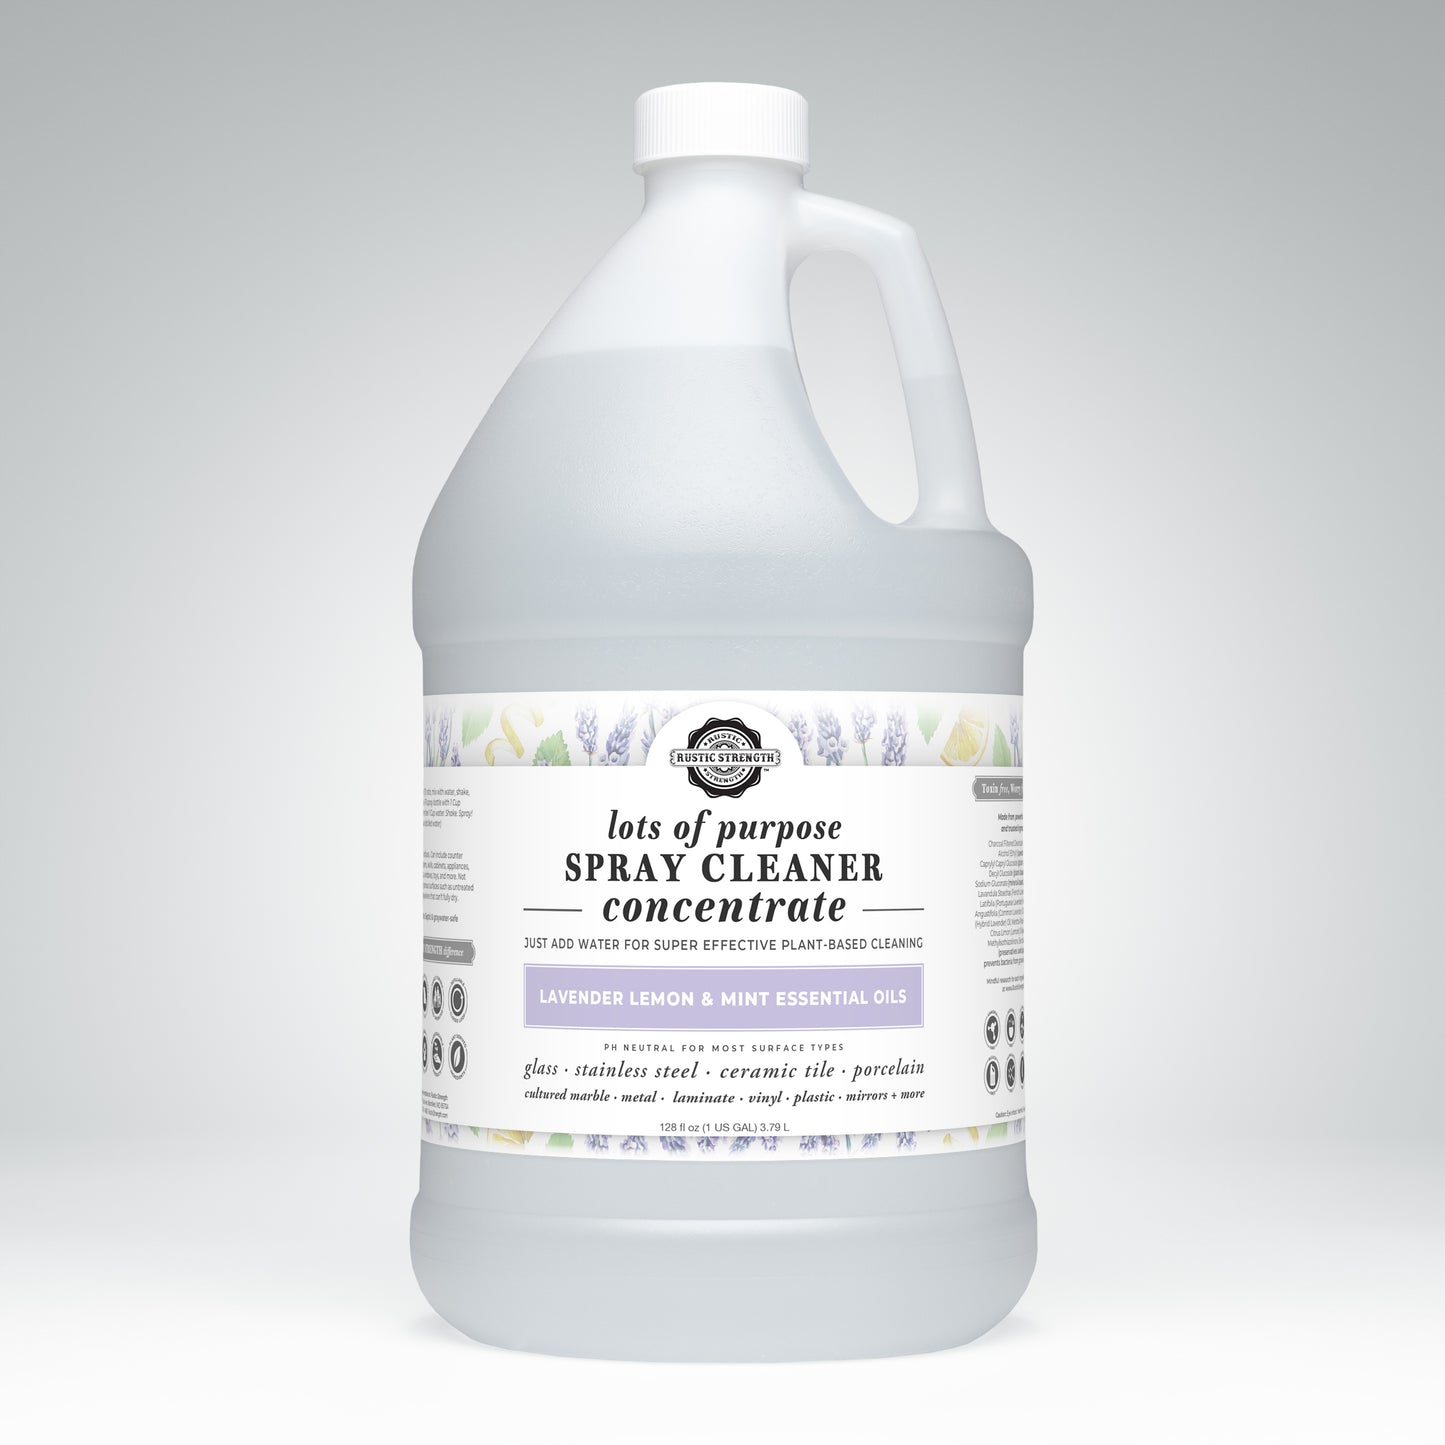 Lots of Purpose Spray Cleaner | Concentrate